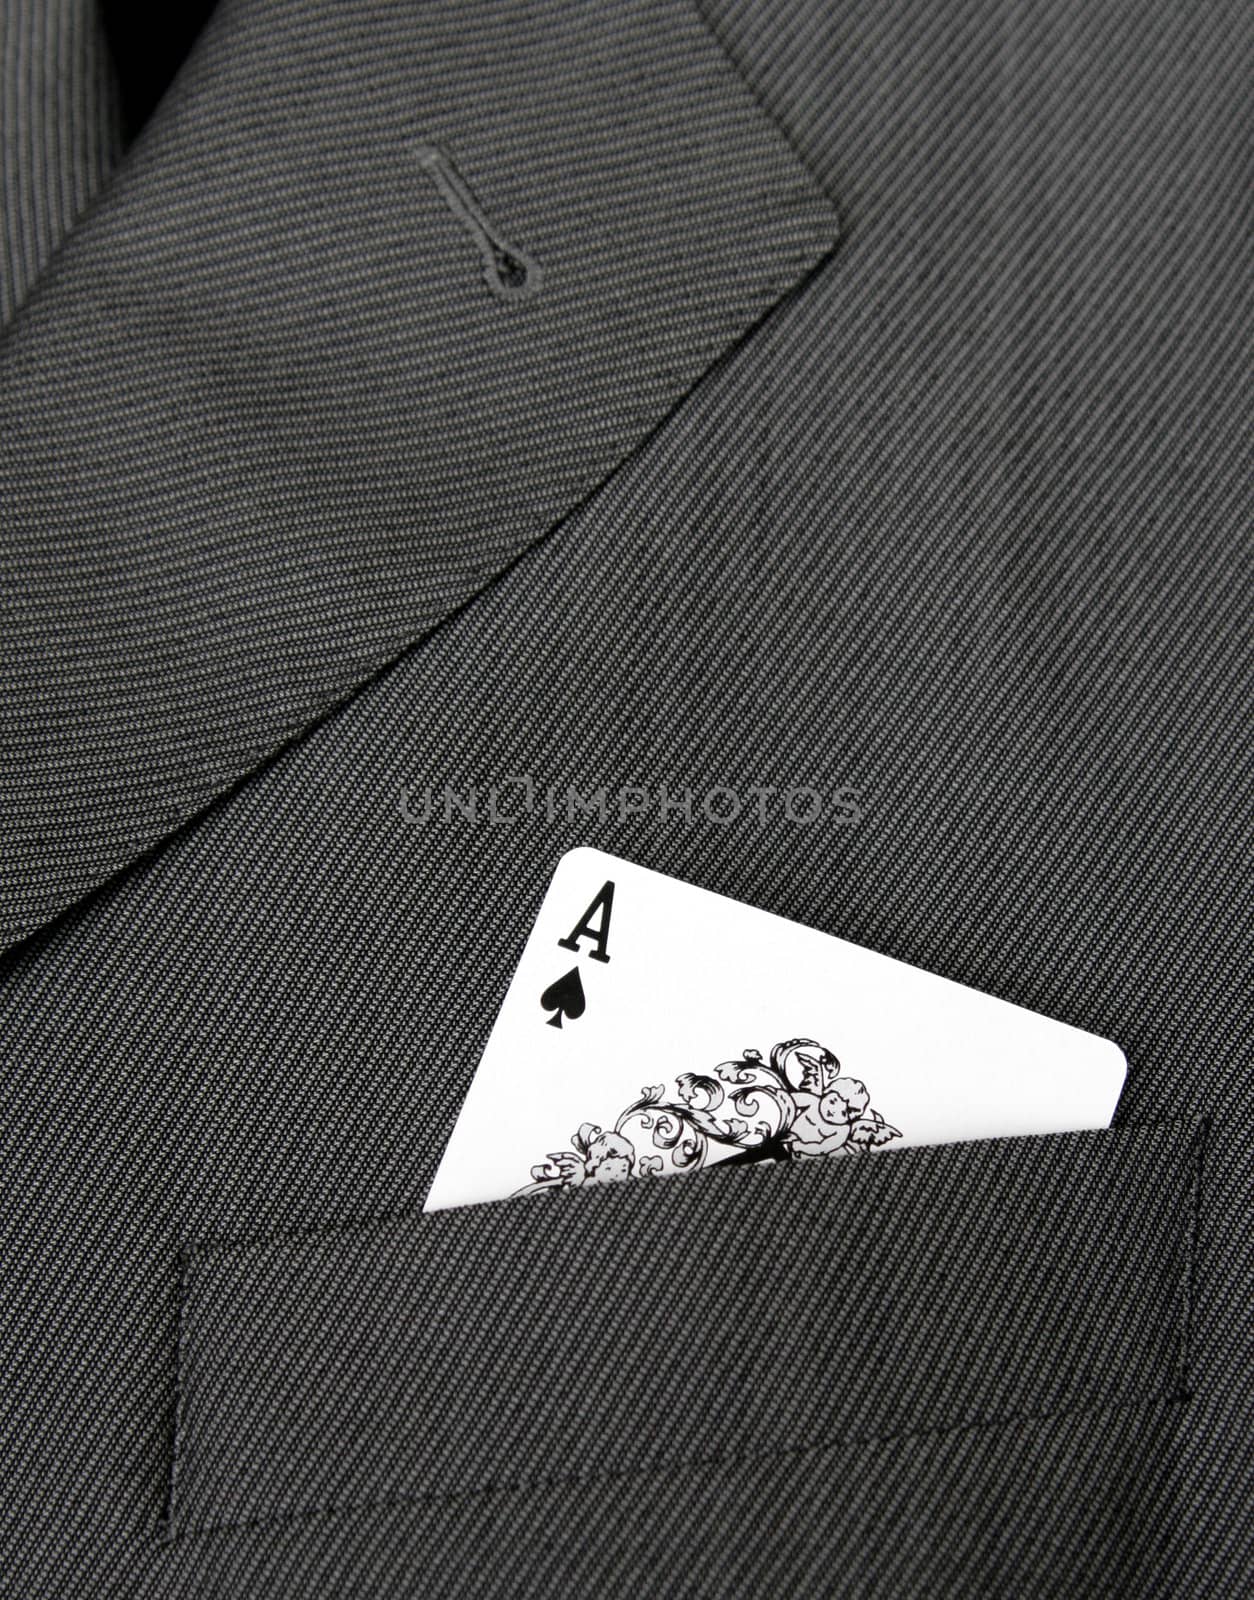 Card Suit - Ace Of Spades Gambling Card In A Suit Jacket Pocket